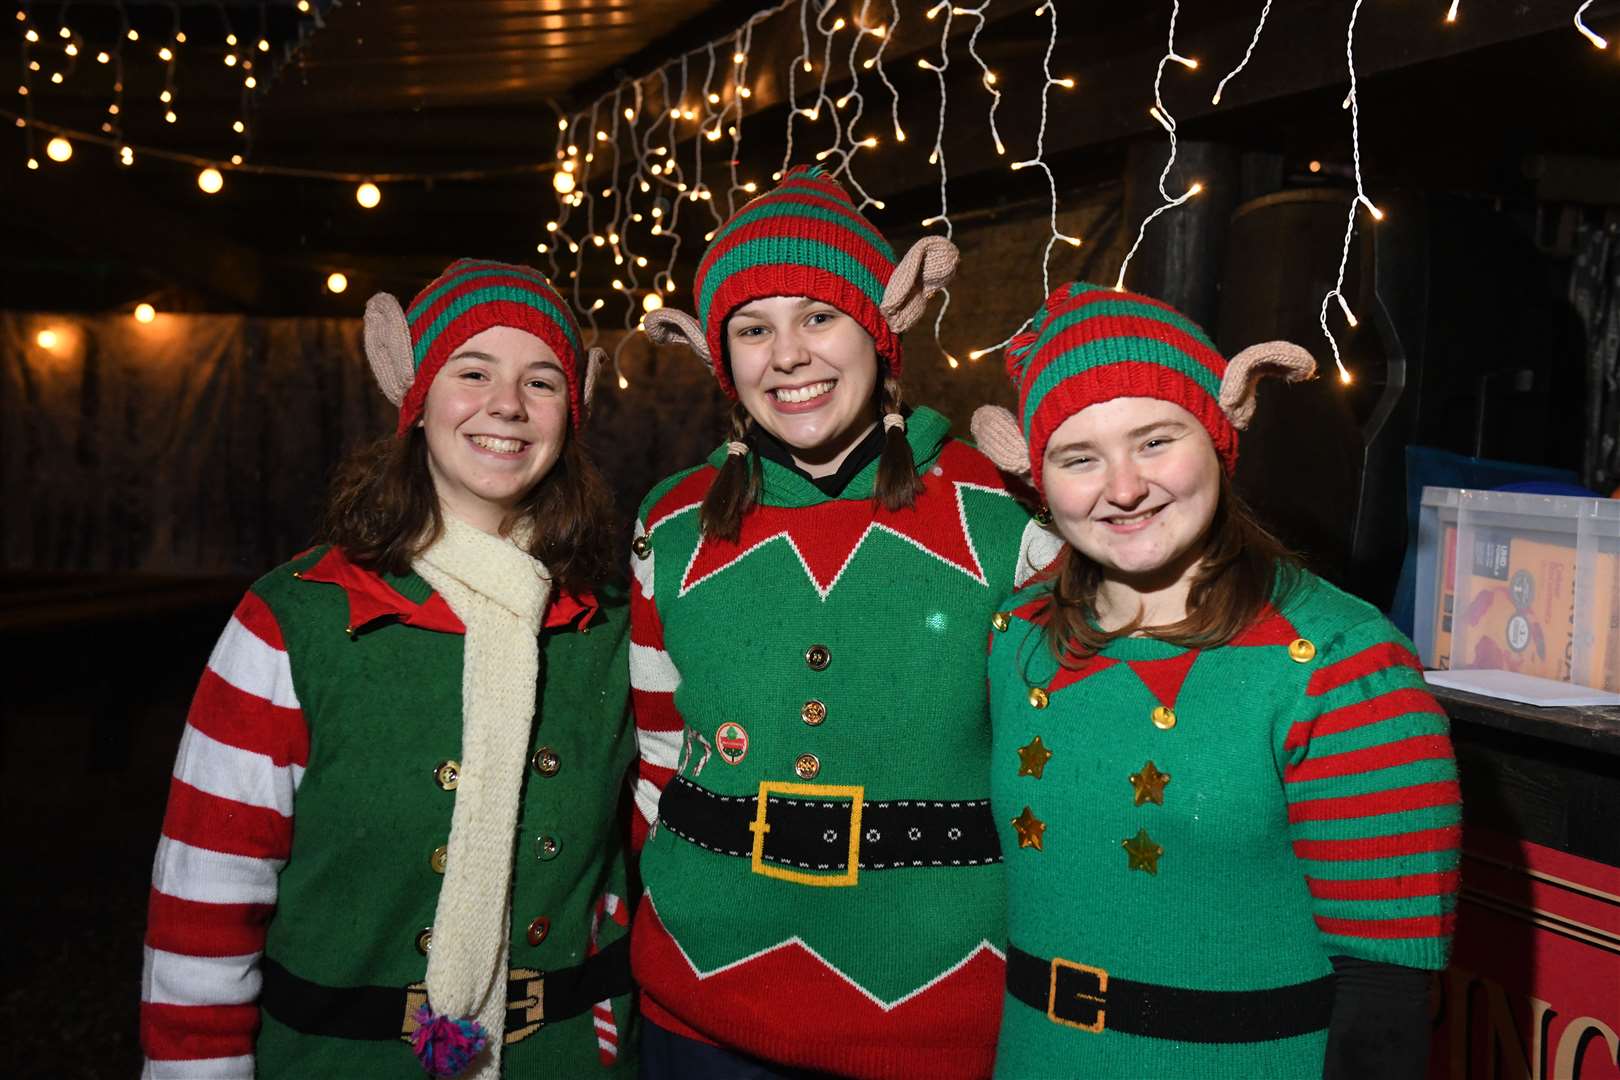 Kirsty Macleod, Teal Skinner and Caoimhe McKeown, elves. Picture: James Mackenzie.